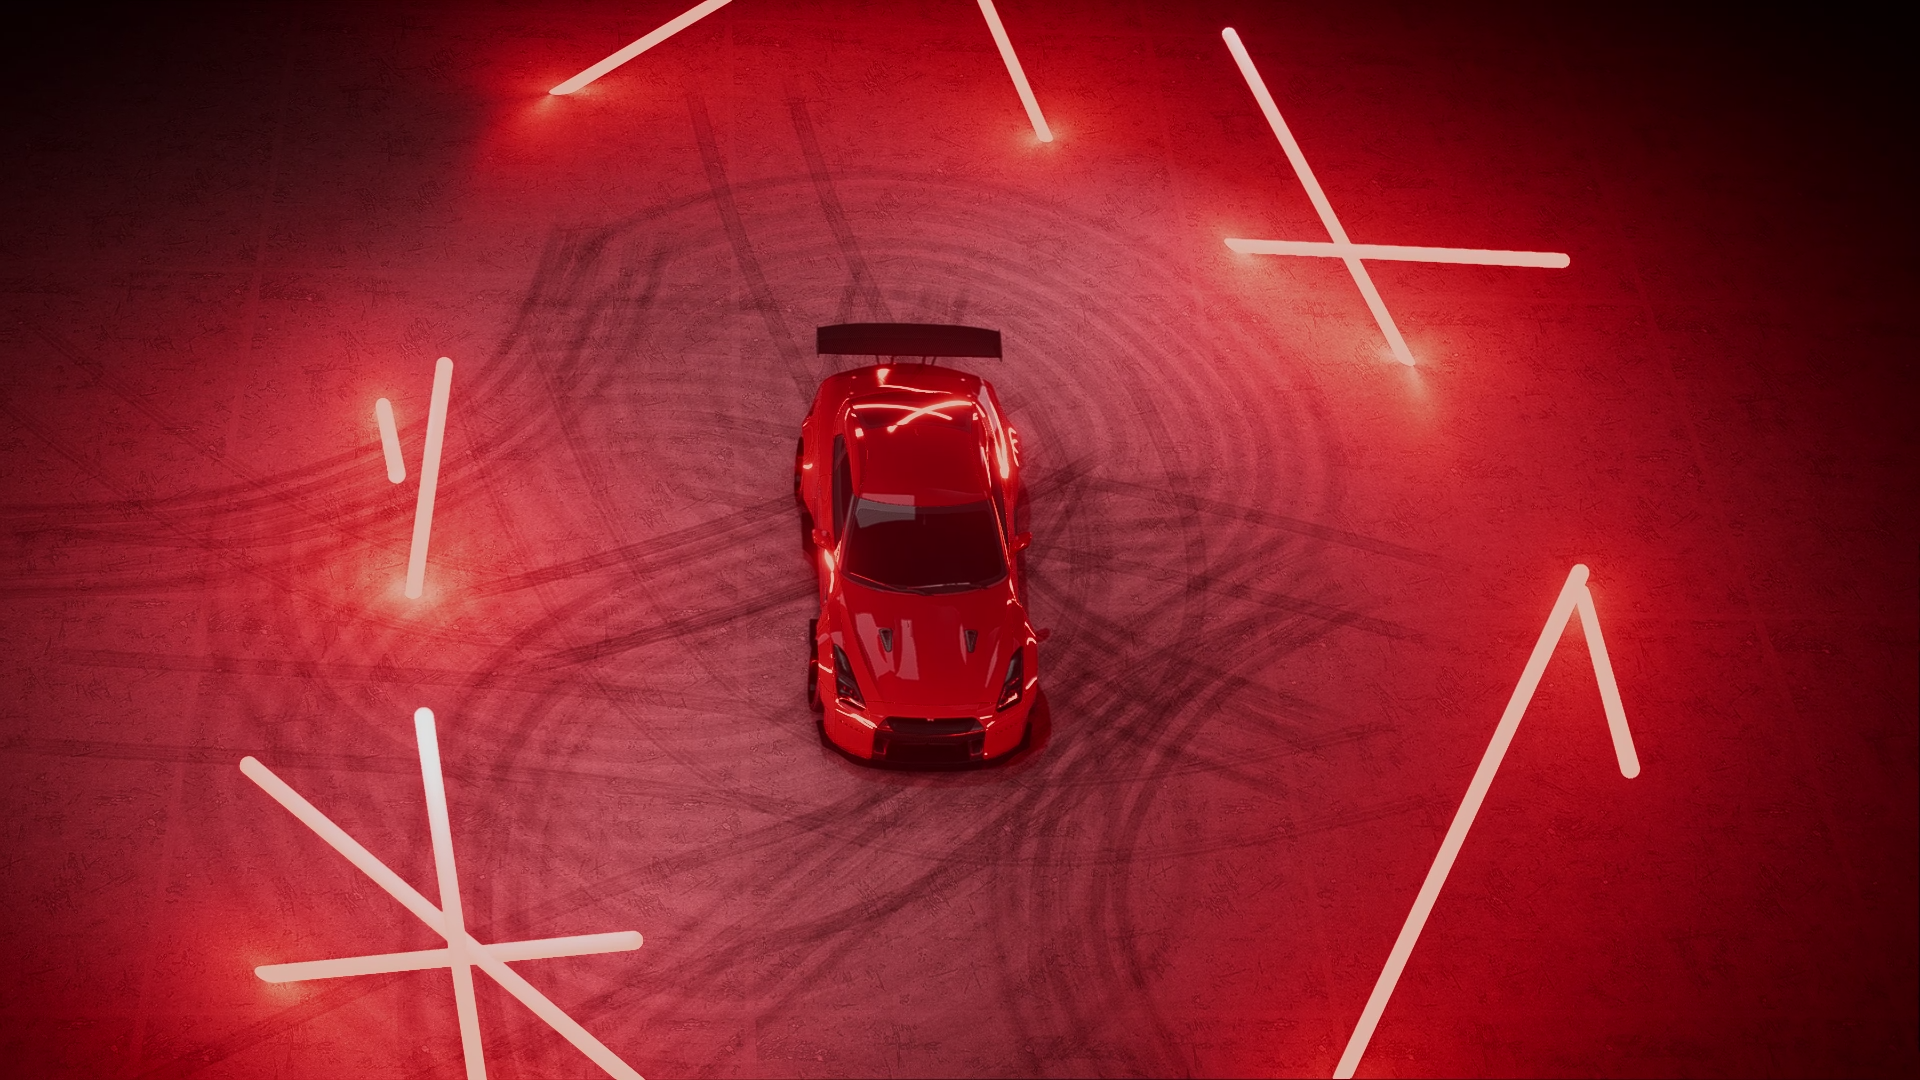 Lights Nissan GTR Red Need For Speed Payback Need For Speed Nissan Skyline GT R R35 Red Cars 1920x1080